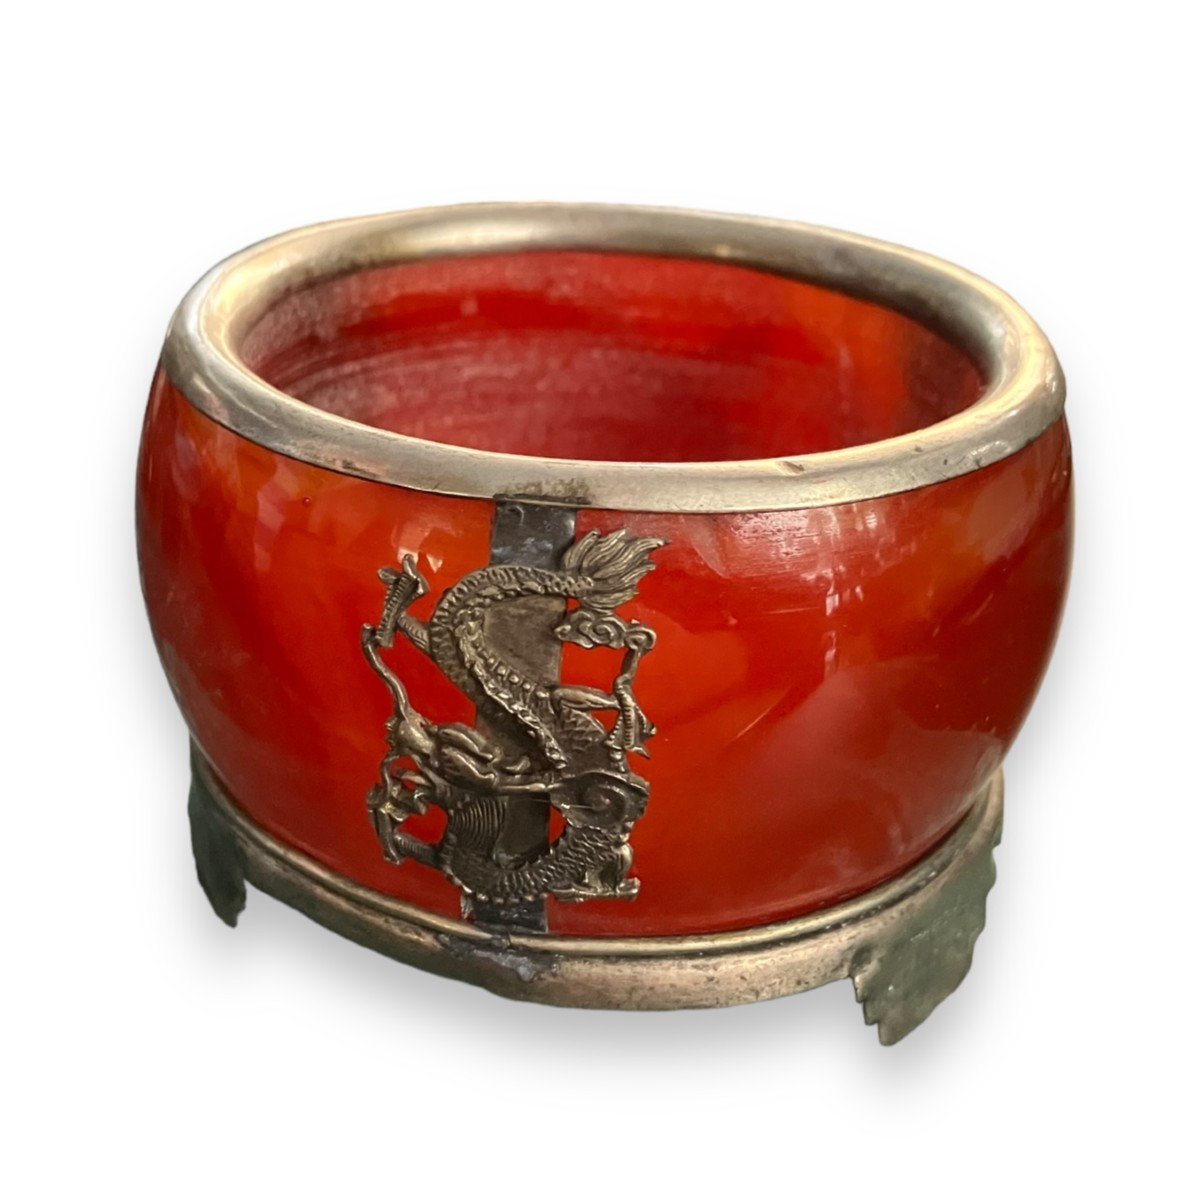 Old Chinese Receptacle Goblet In Carnelian And Silver Metal Decor Of Dragons